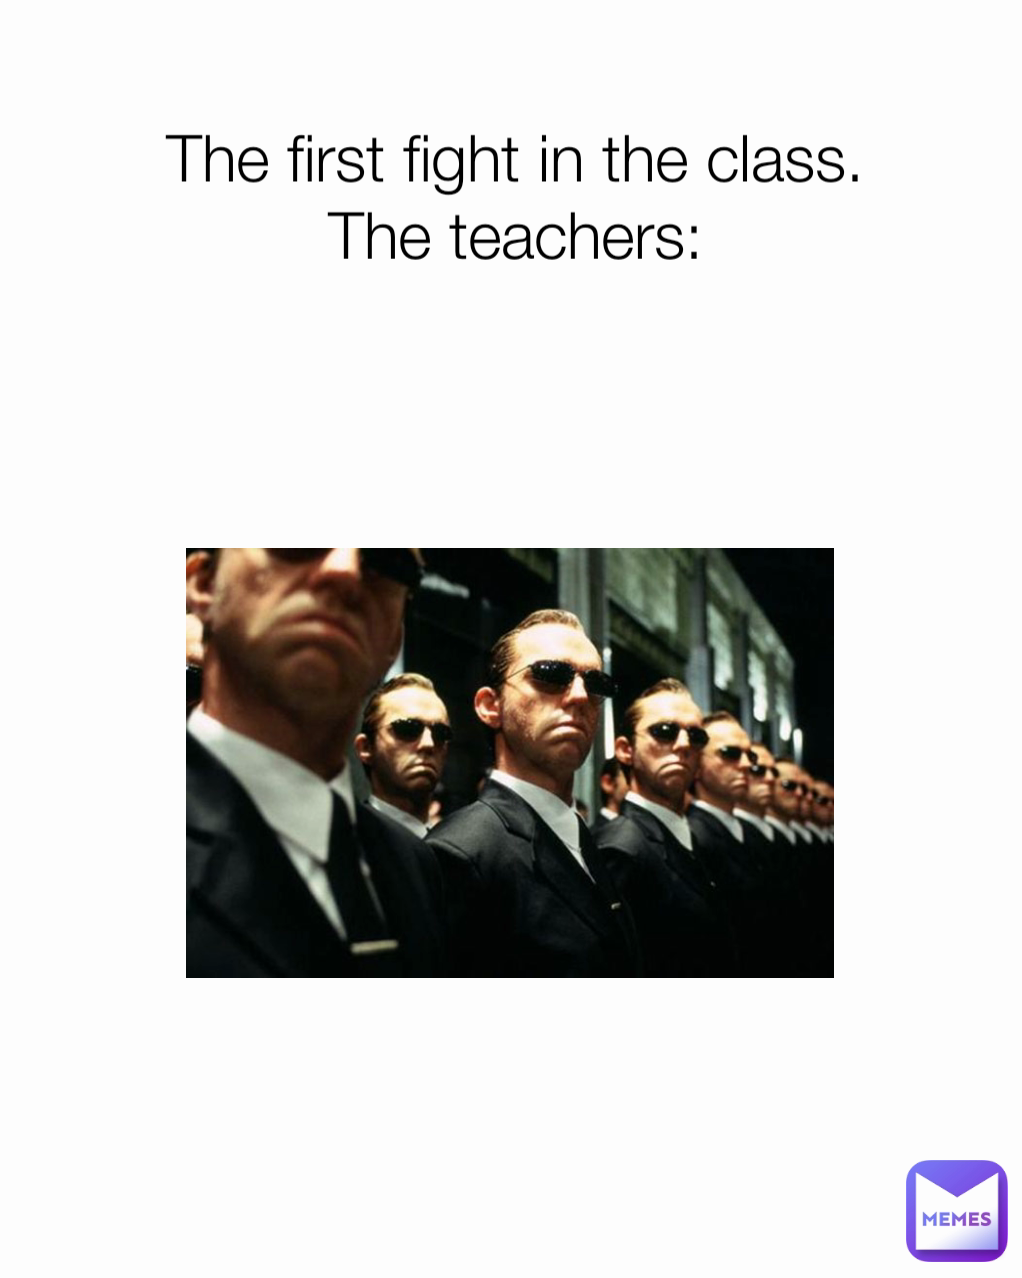 The first fight in the class.
The teachers: